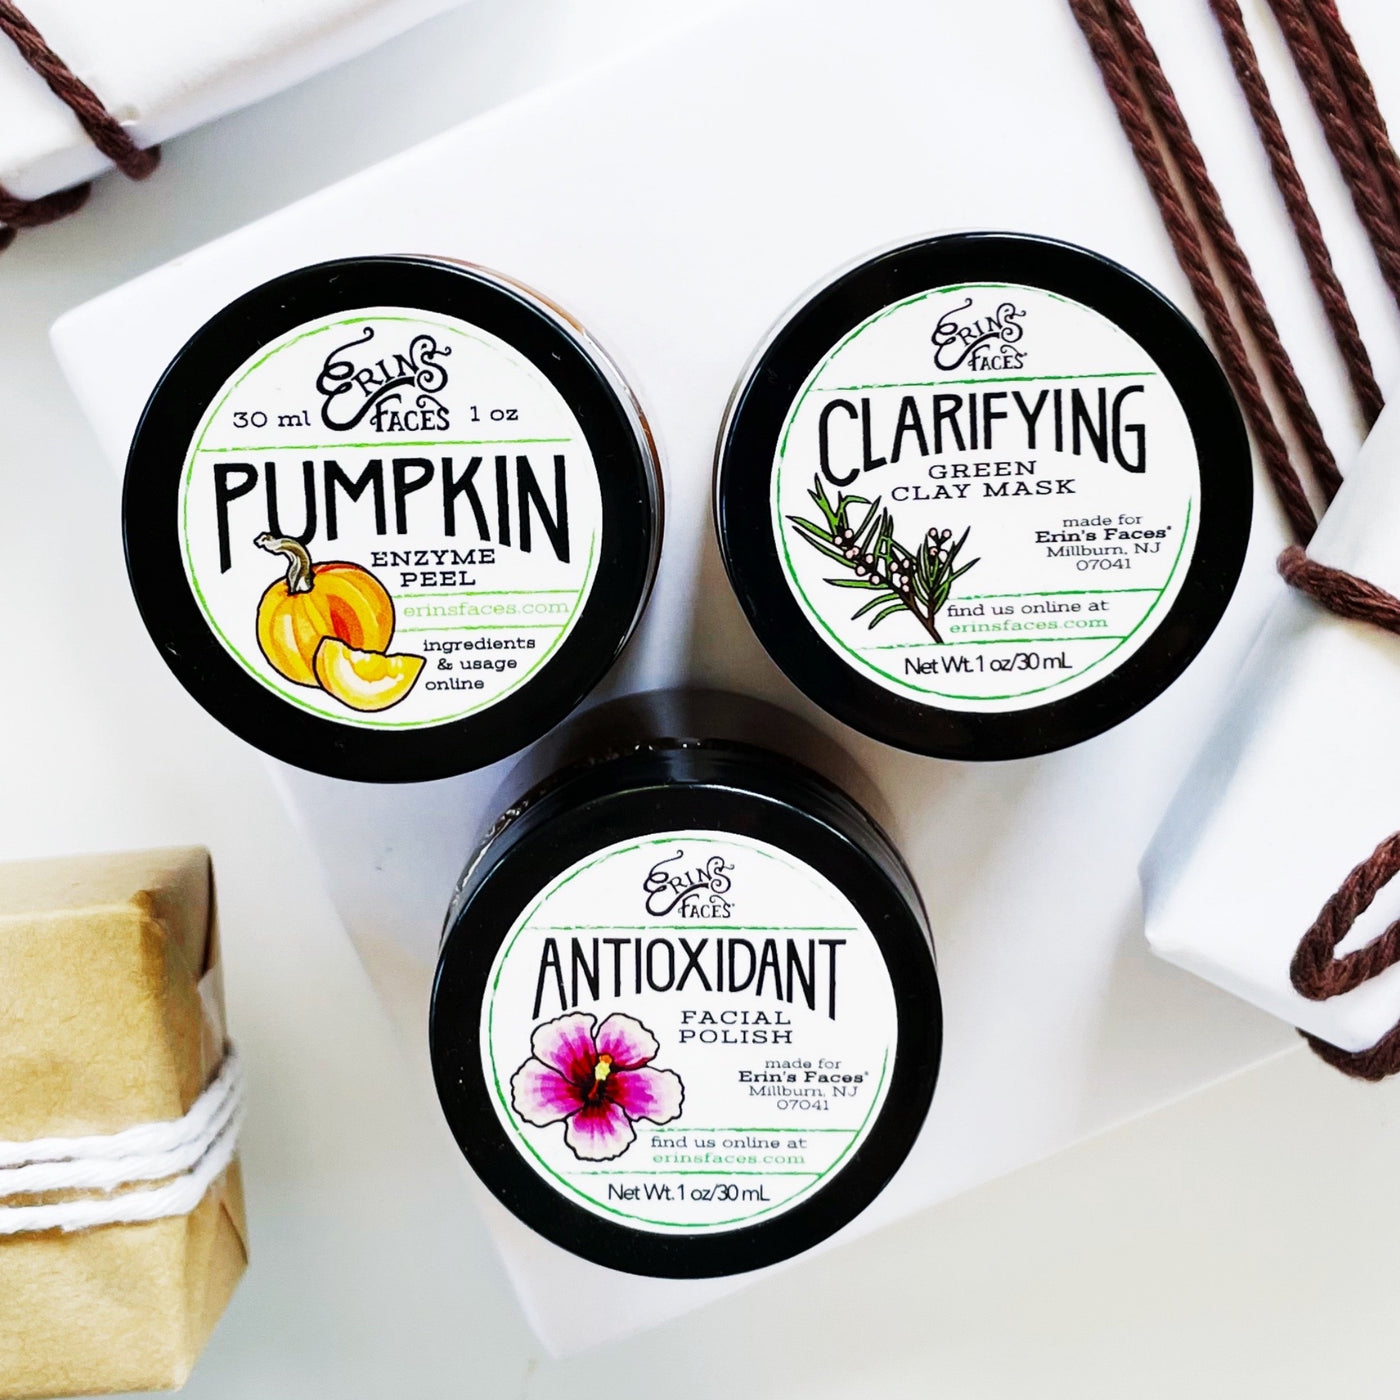 3 mask minis - pumpkin enzyme peel, clarifying green clay mask and antioxidant facial polish surrounded by presents